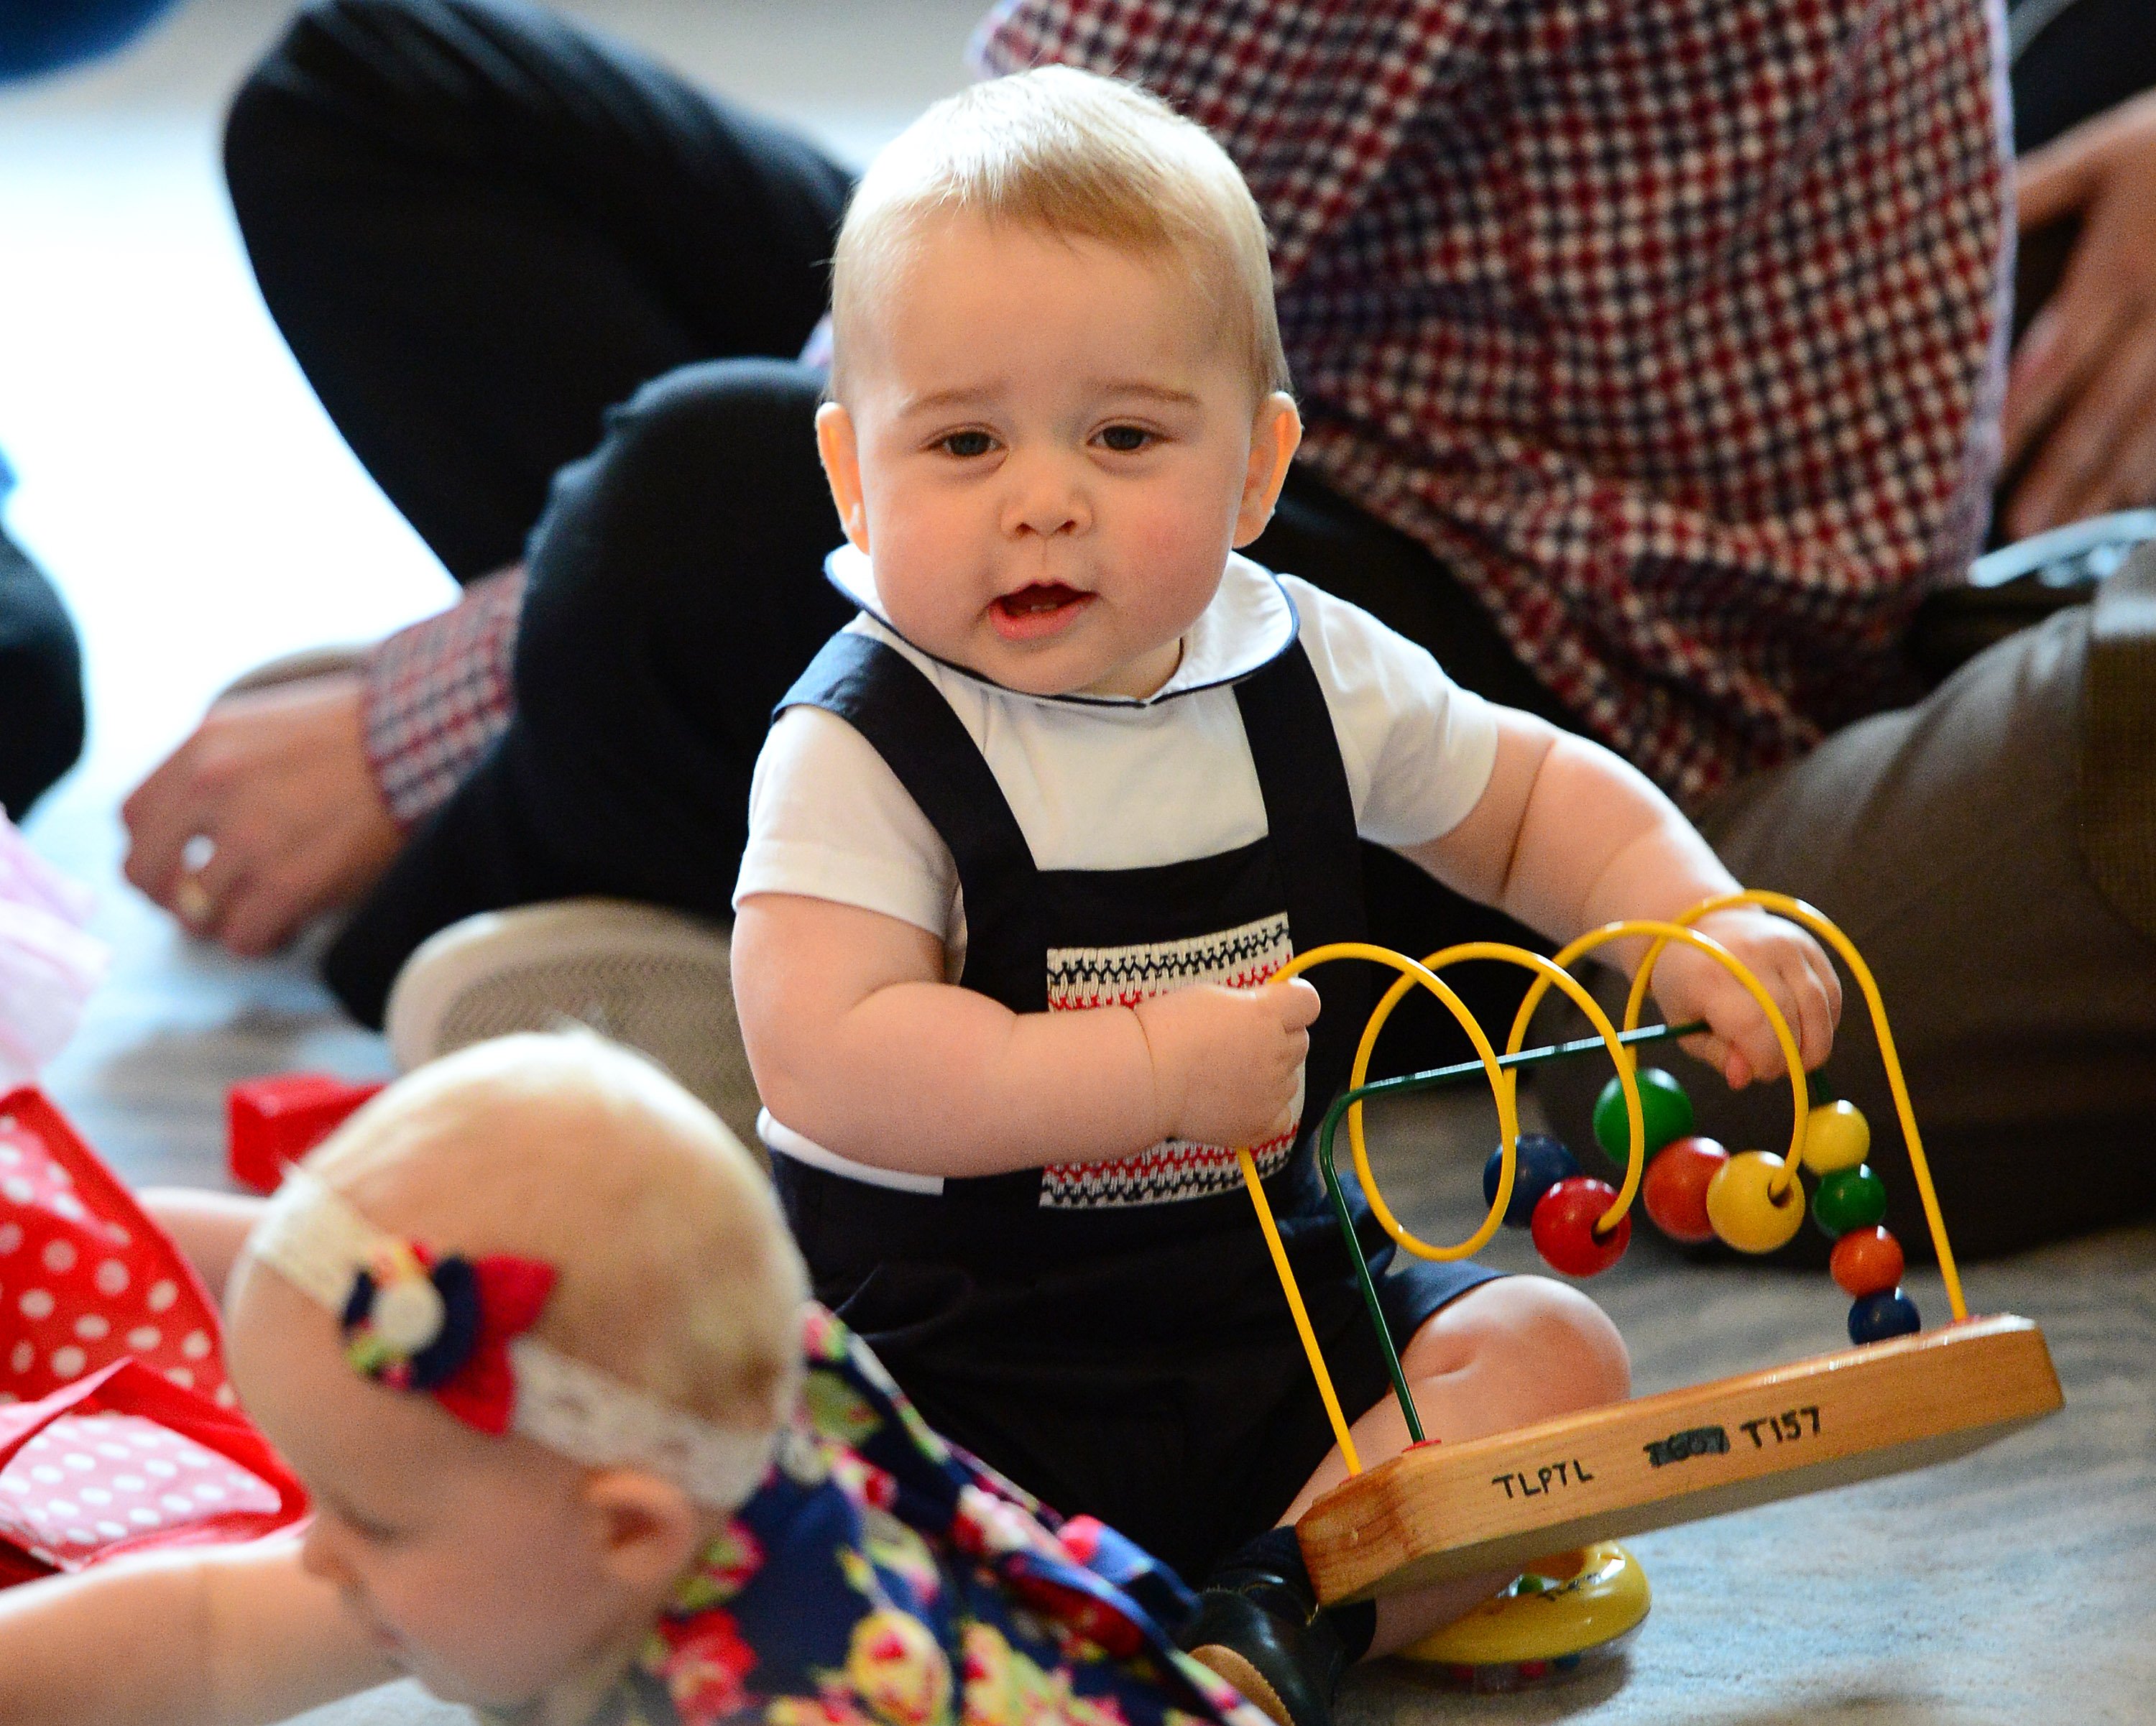 Prince George of Cambridge attends a Plunket Play Group at Government House on April 9, 2014, in Wellington, New Zealand. | Source: Getty Images